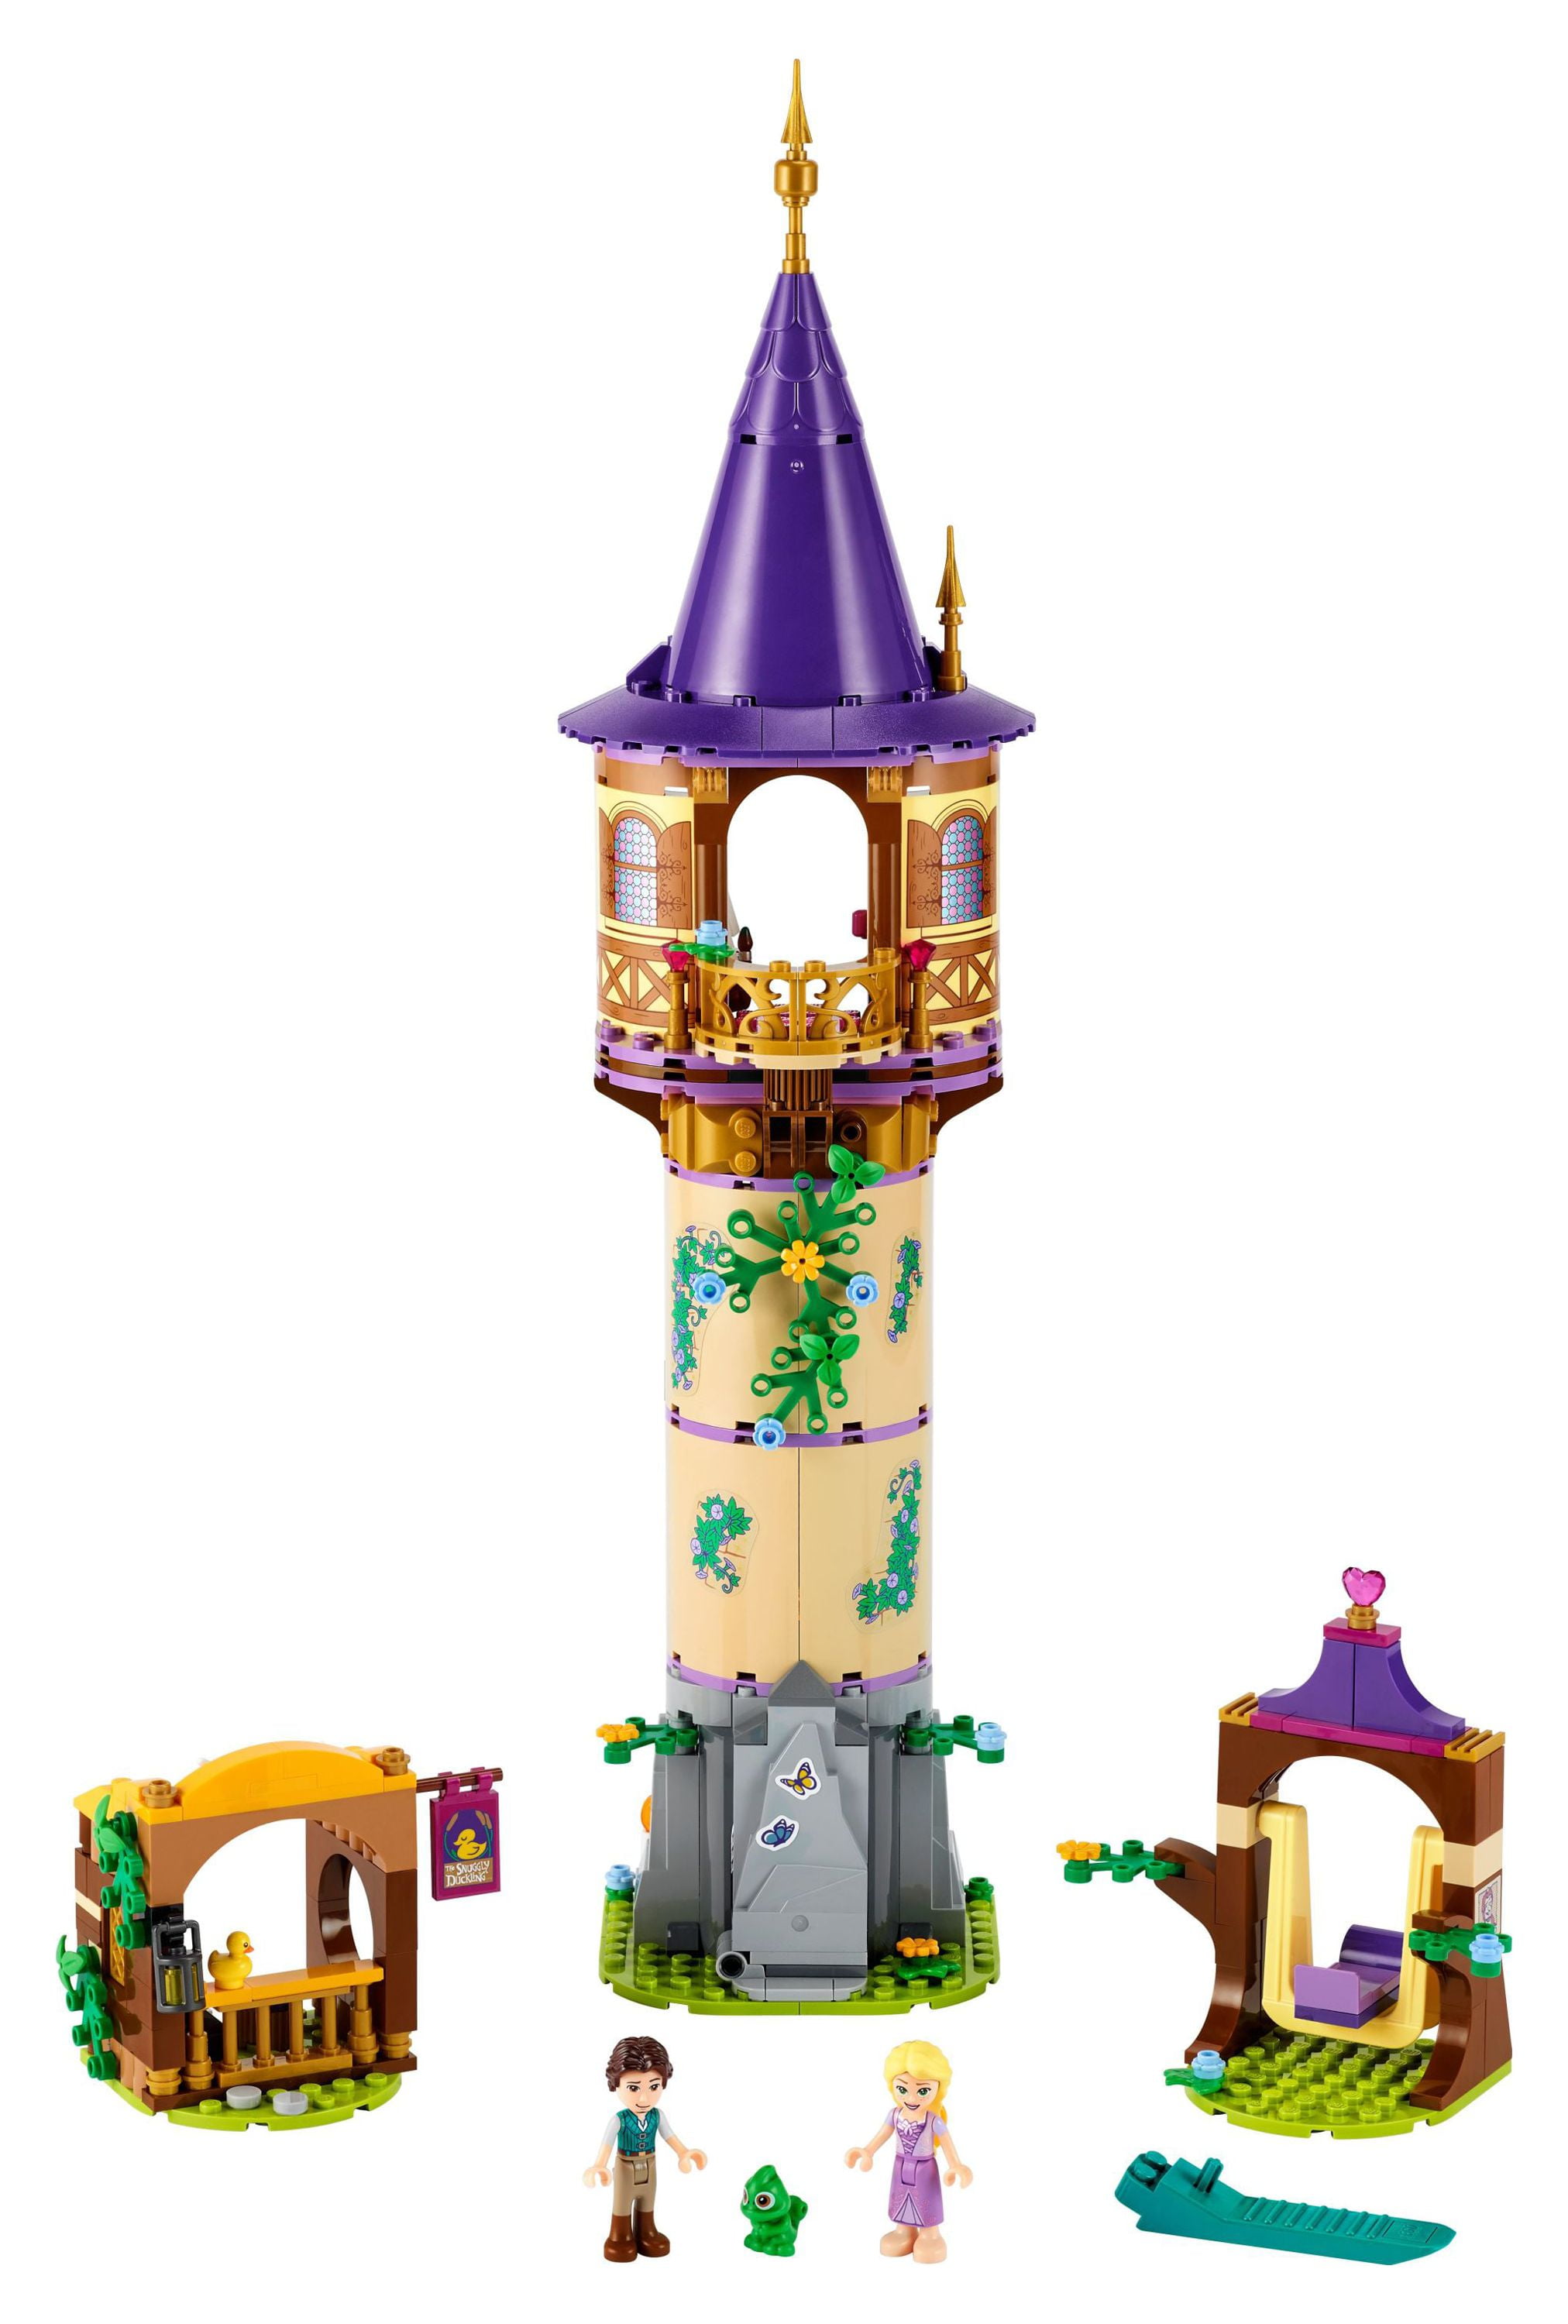 LEGO Disney Princess Rapunzel's Tower 43187 Building Set - Castle Toy Kit,  Playset with 2 Mini-Dolls and Pascal Figure from Tangled Movie, Ideal Gift